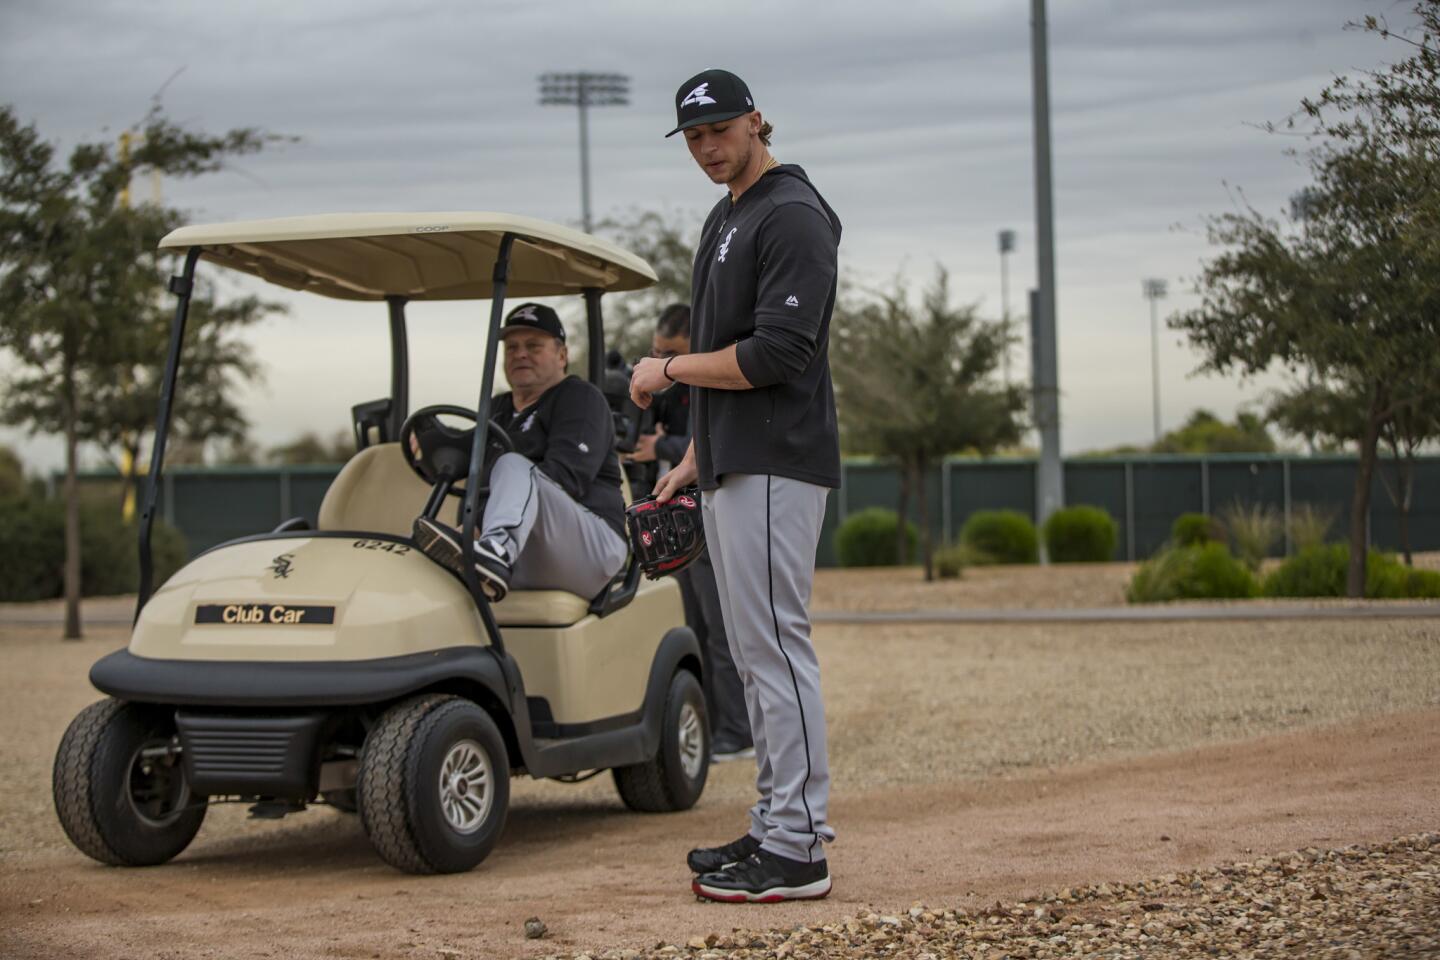 White Sox pitcher Michael Kopech talks to pitching coach Don Cooper at spring training on Feb. 14, 2019.